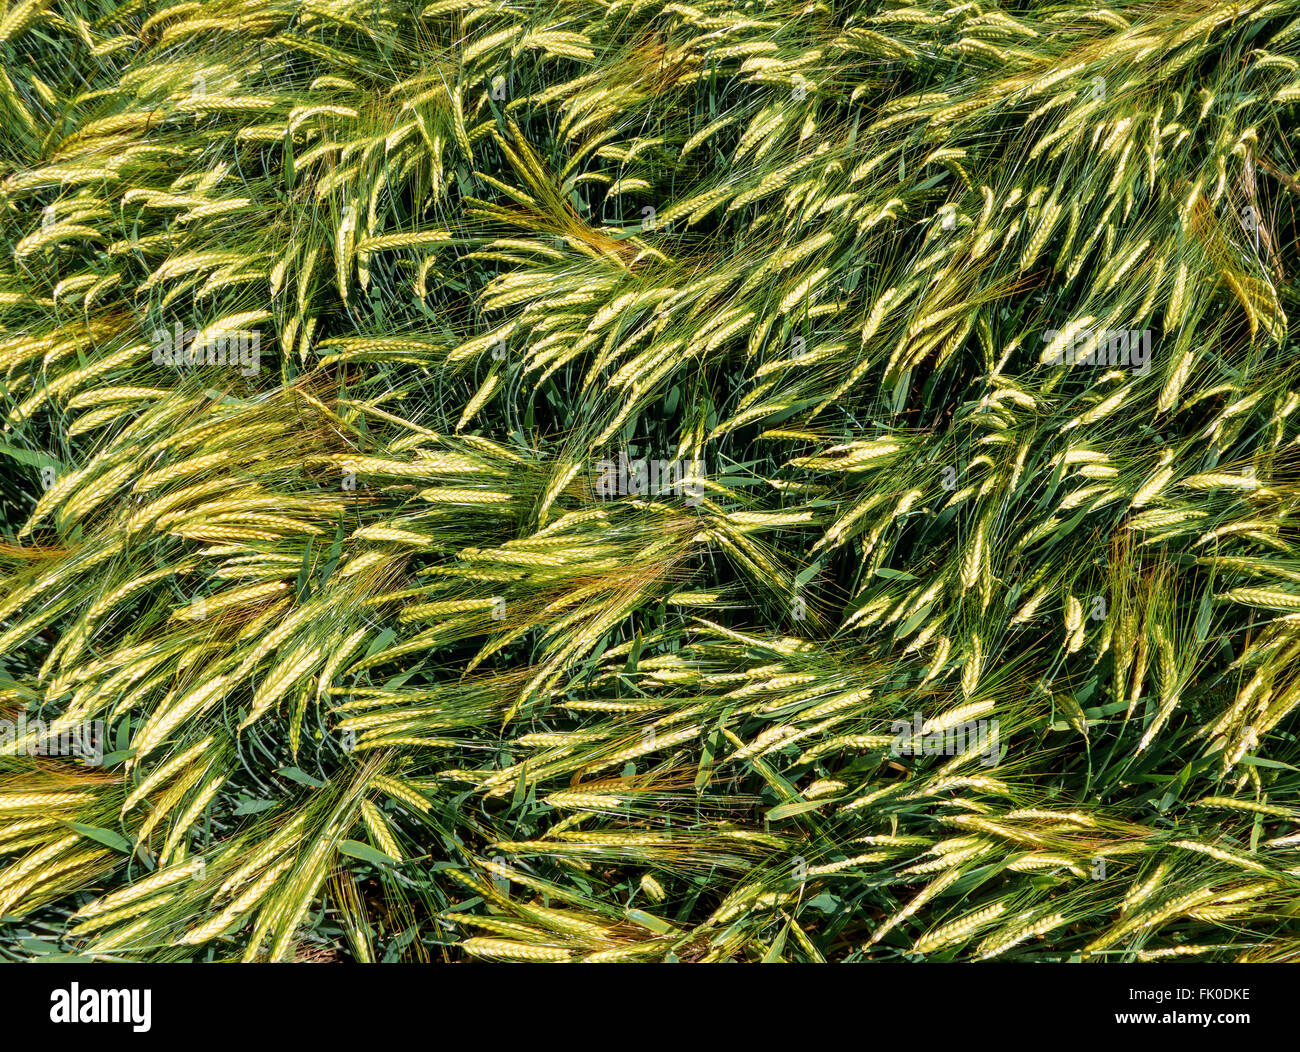 Green ears of barley in a field, taken from above in close-up Stock Photo